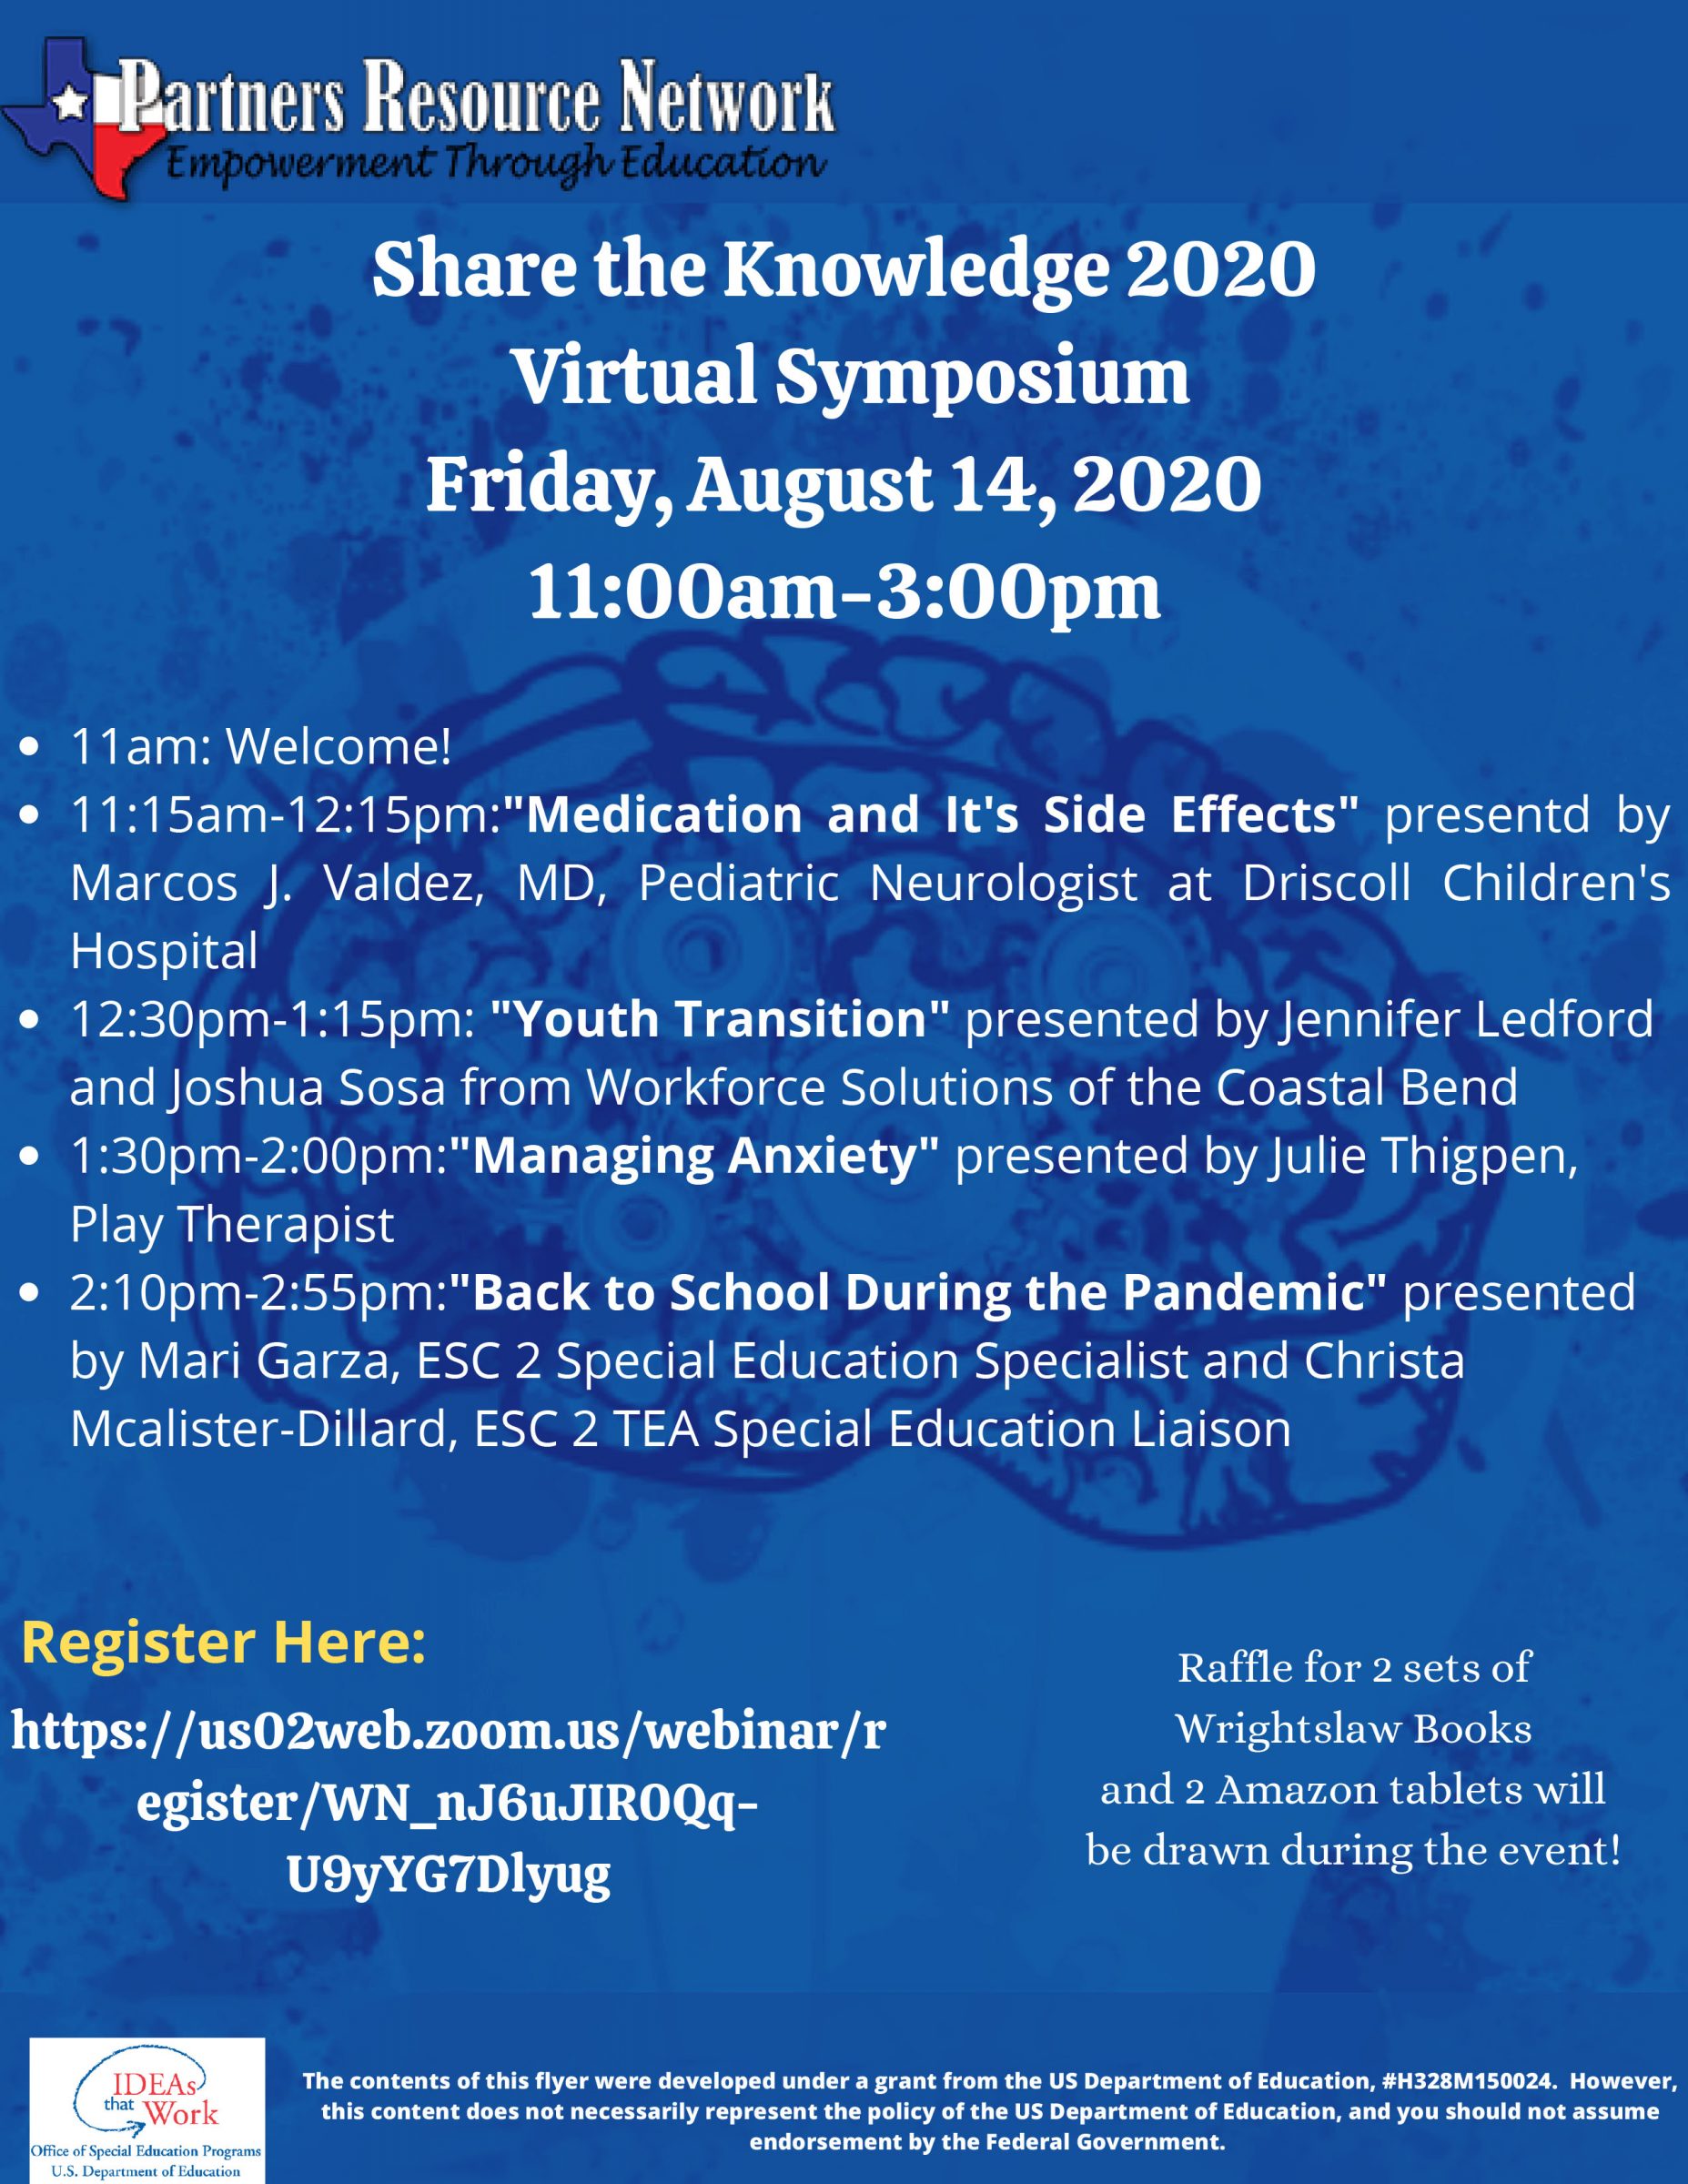 Share the Knowledge 2020 - Virtual Symposium Friday August 14, 2020 from 11:00 AM - 3:00 PM, Click Above to Register